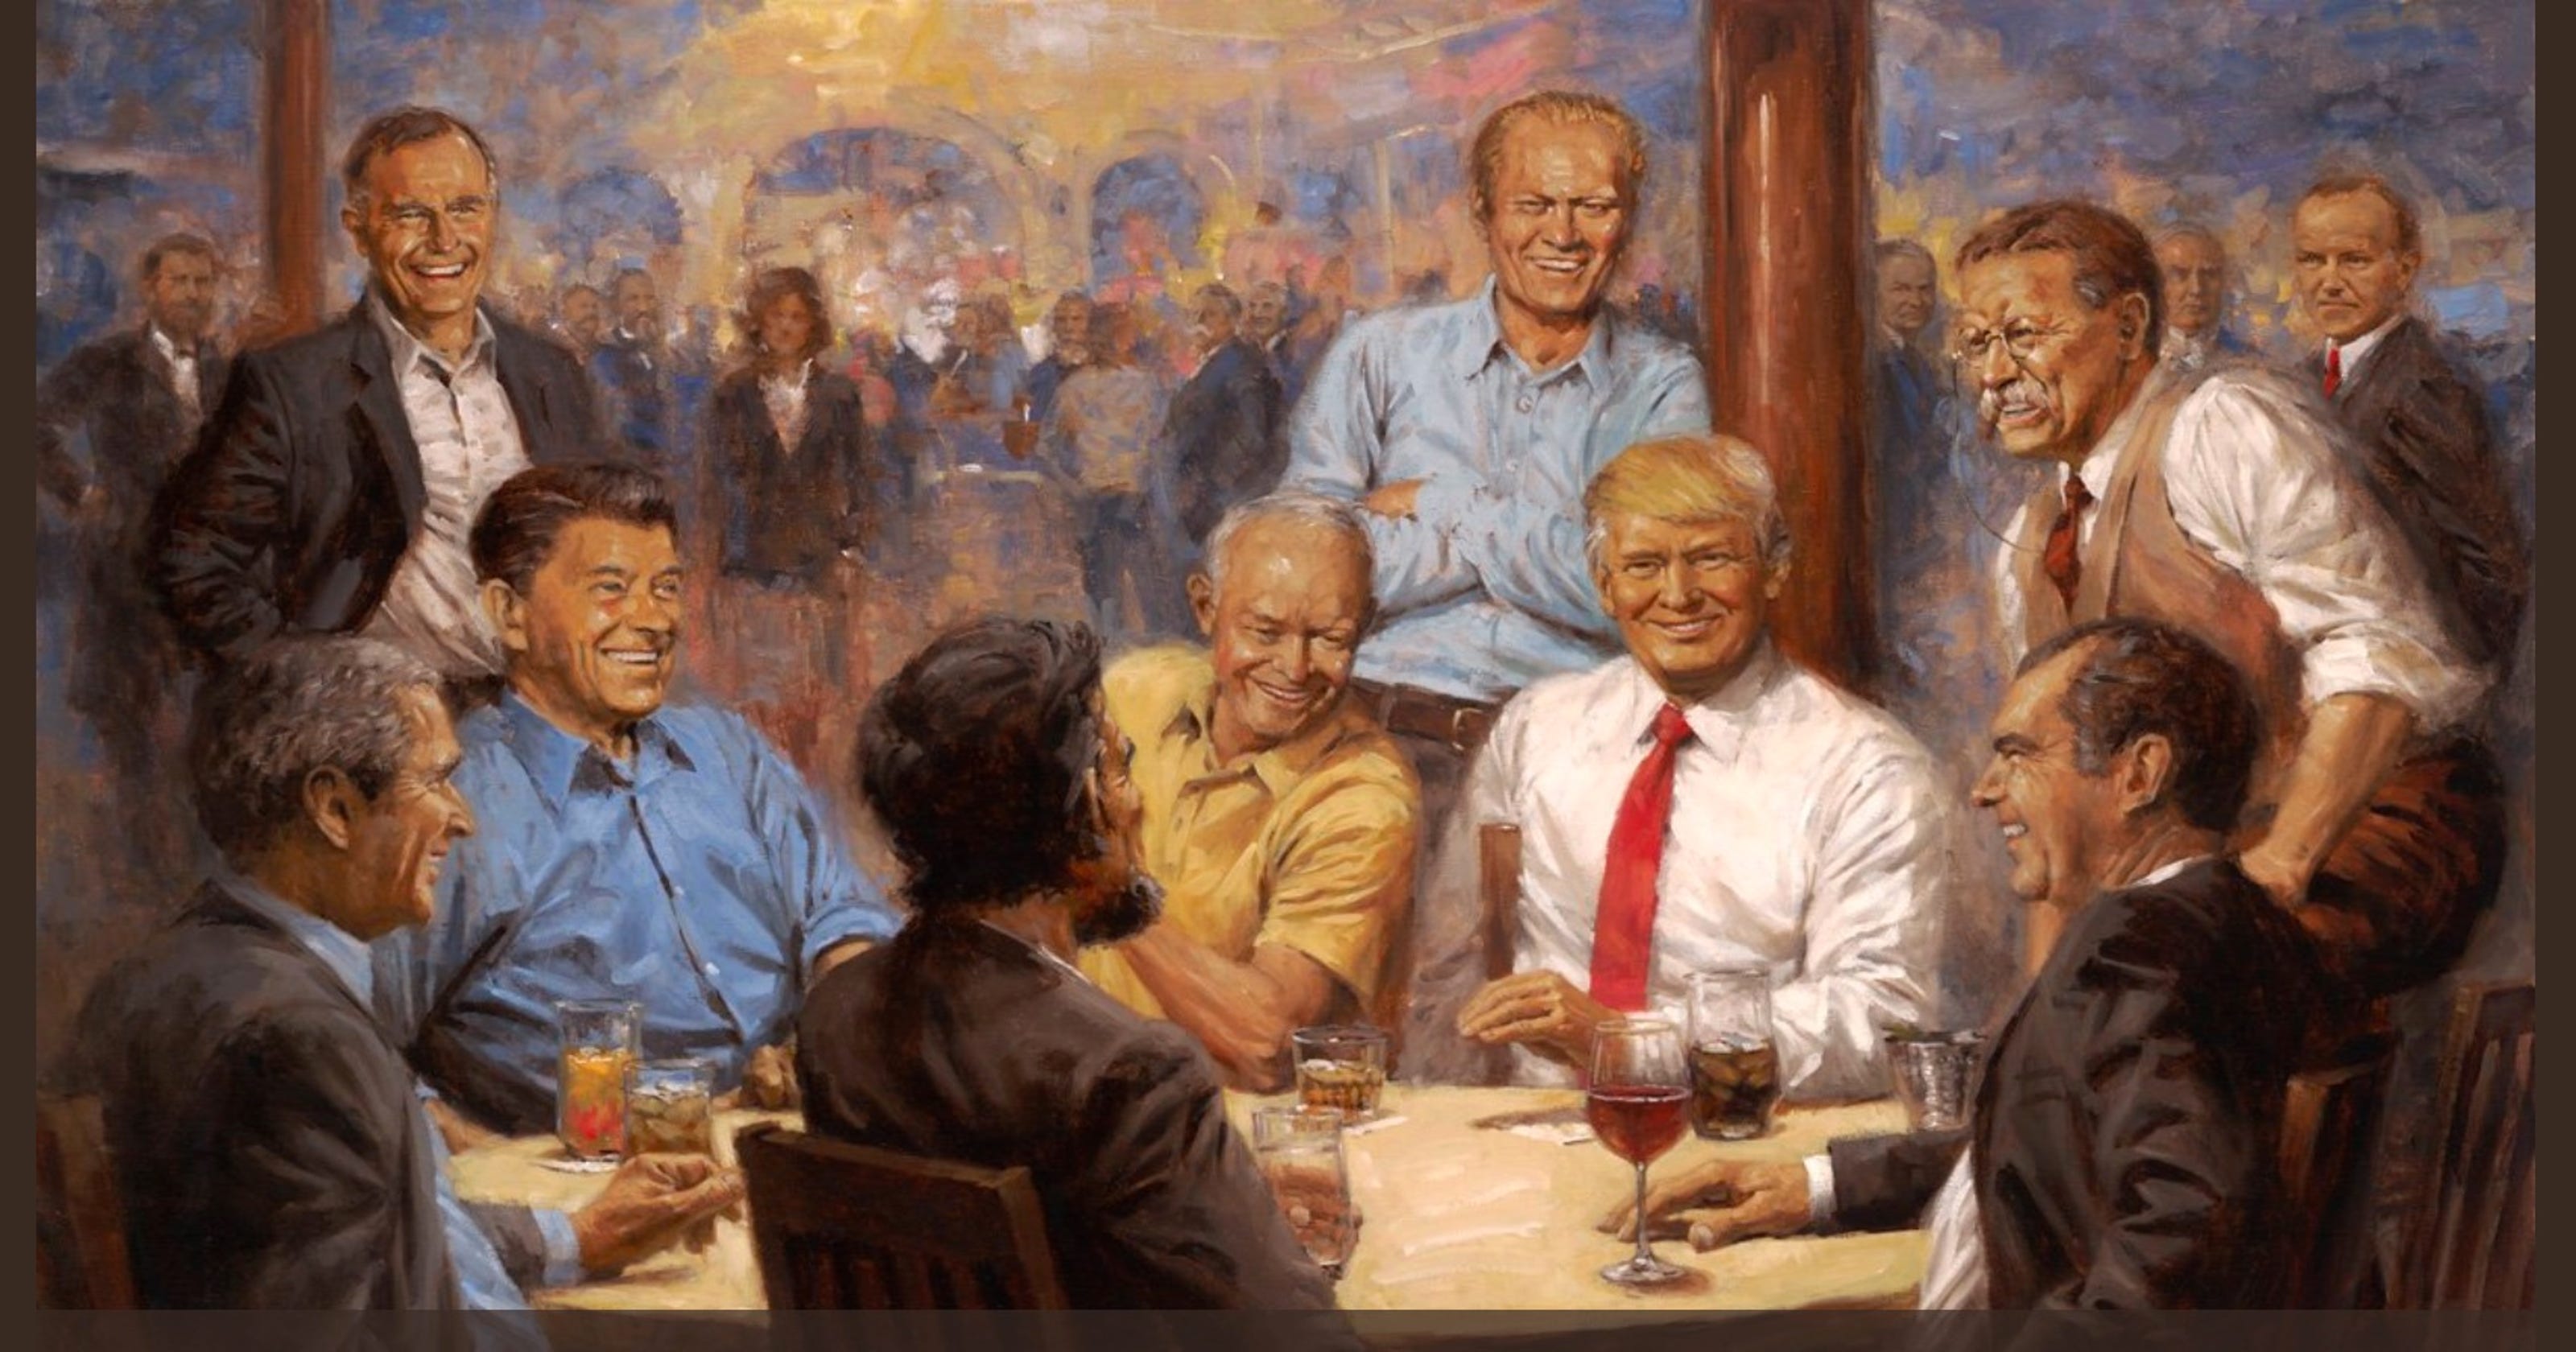 60-minutes-painting-of-trump-with-past-presidents-in-white-house